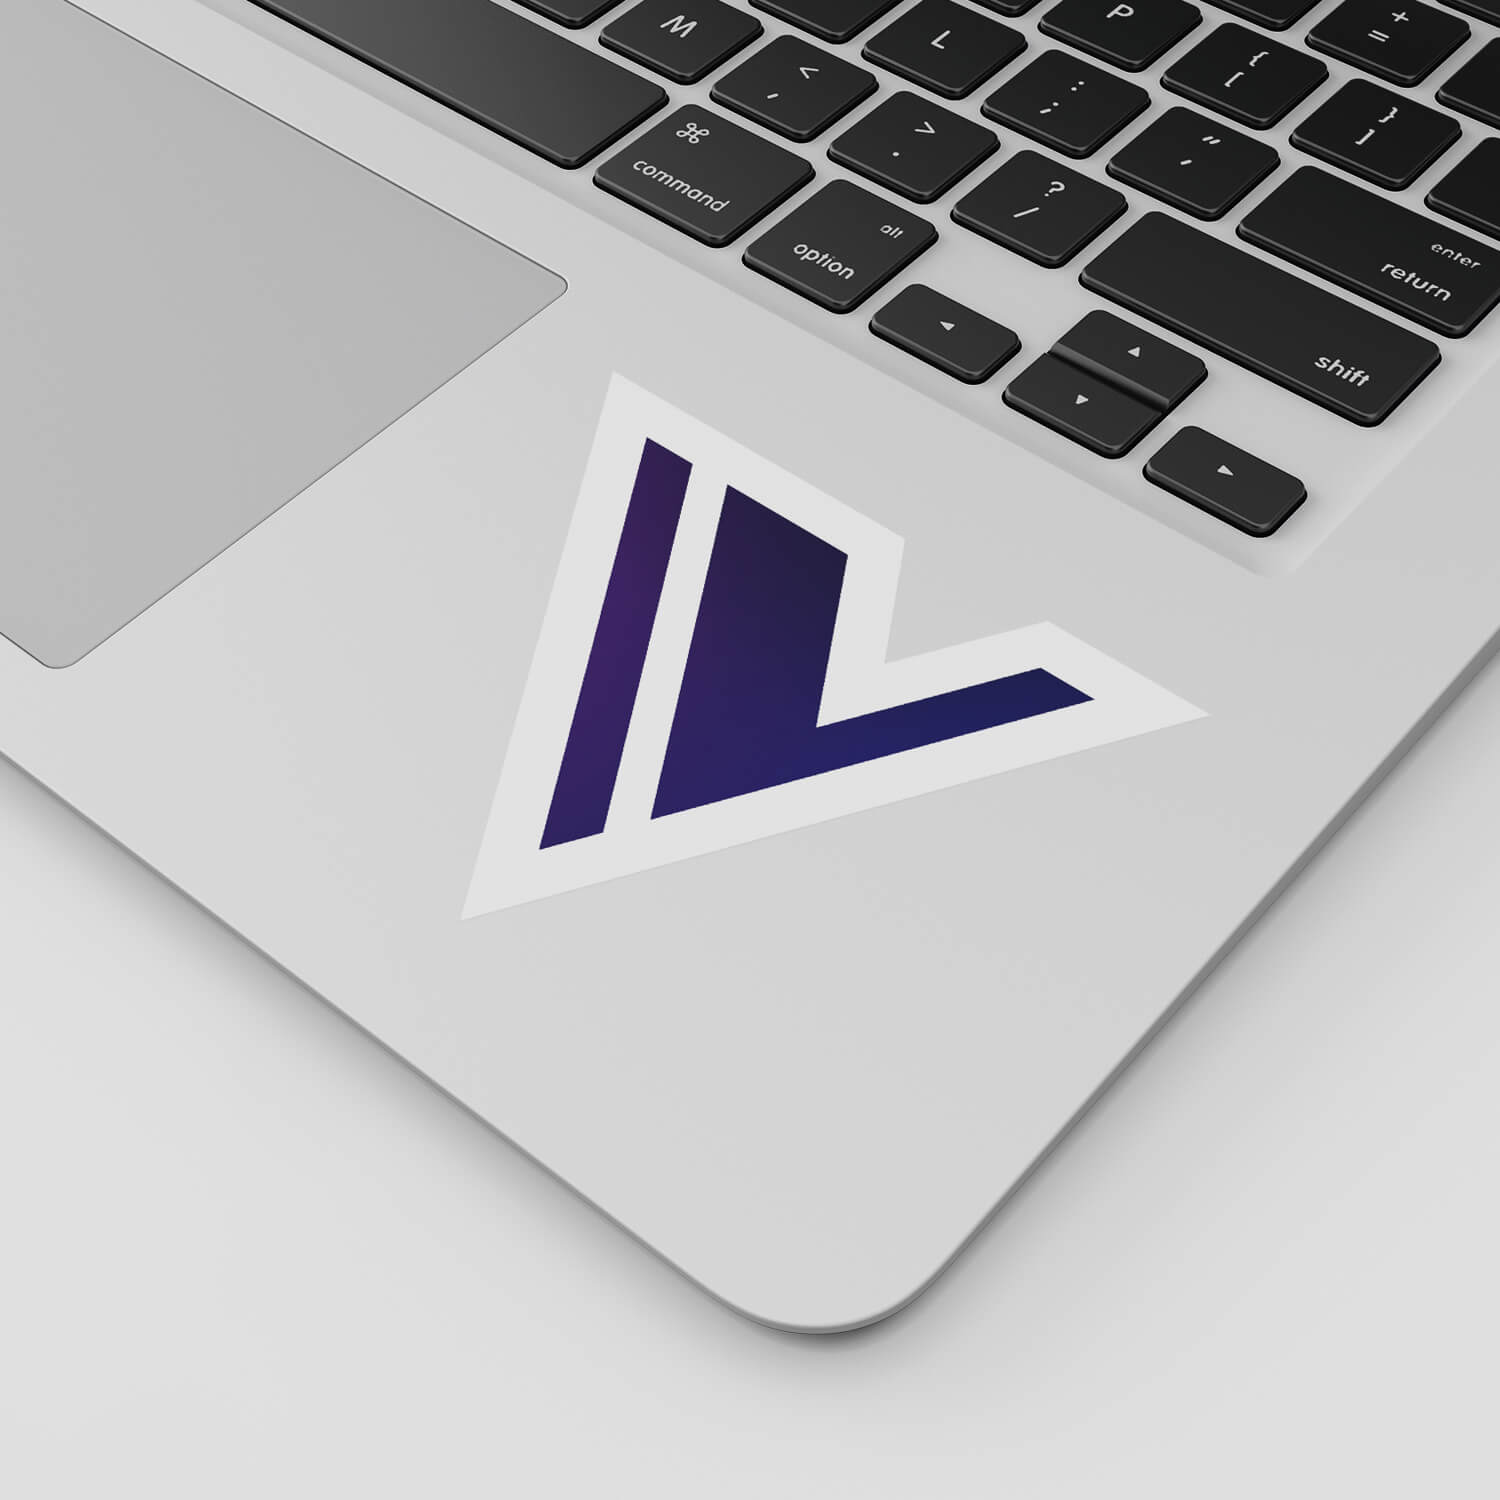 Close-up shot of a laptop with a sticker of the Vala app icon